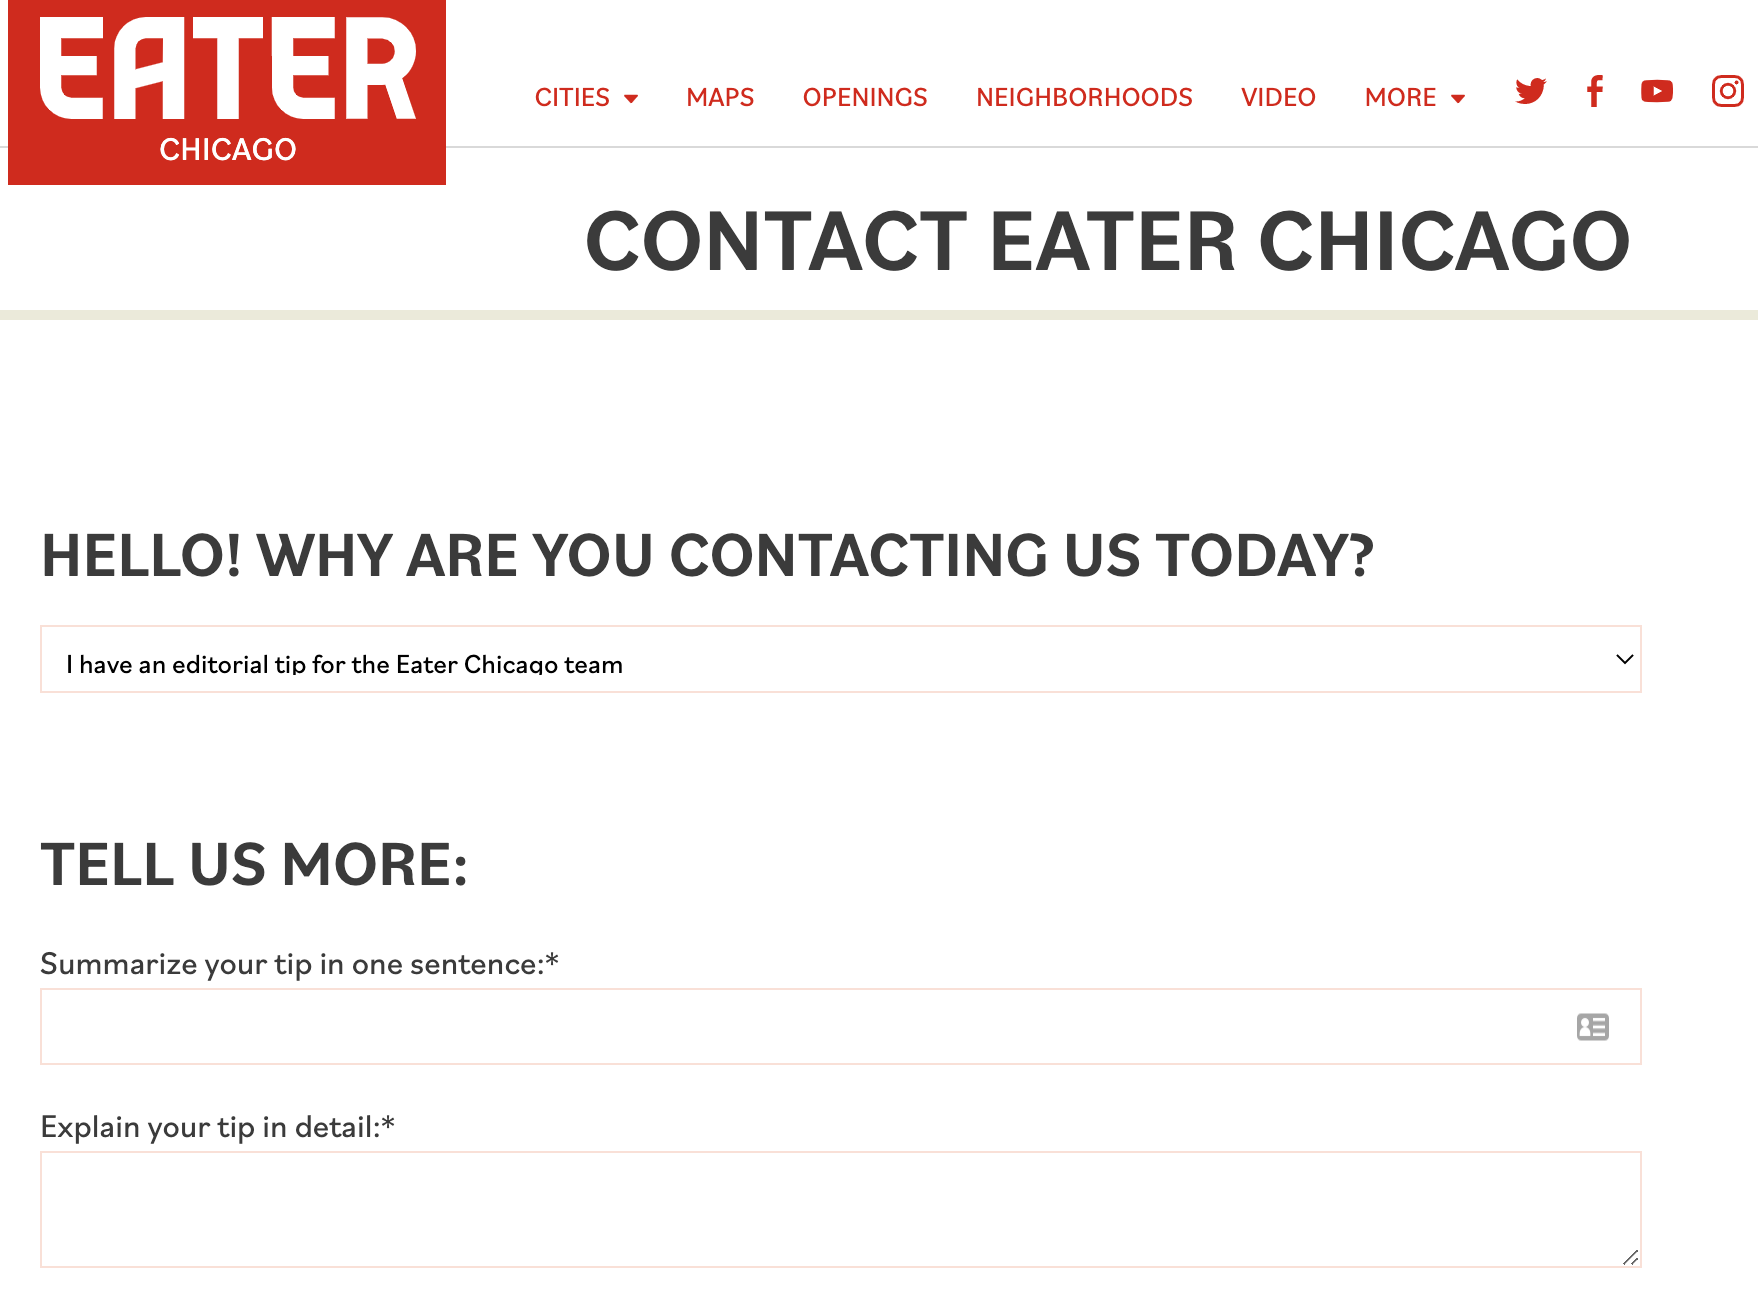 Eater Chicago contact us page